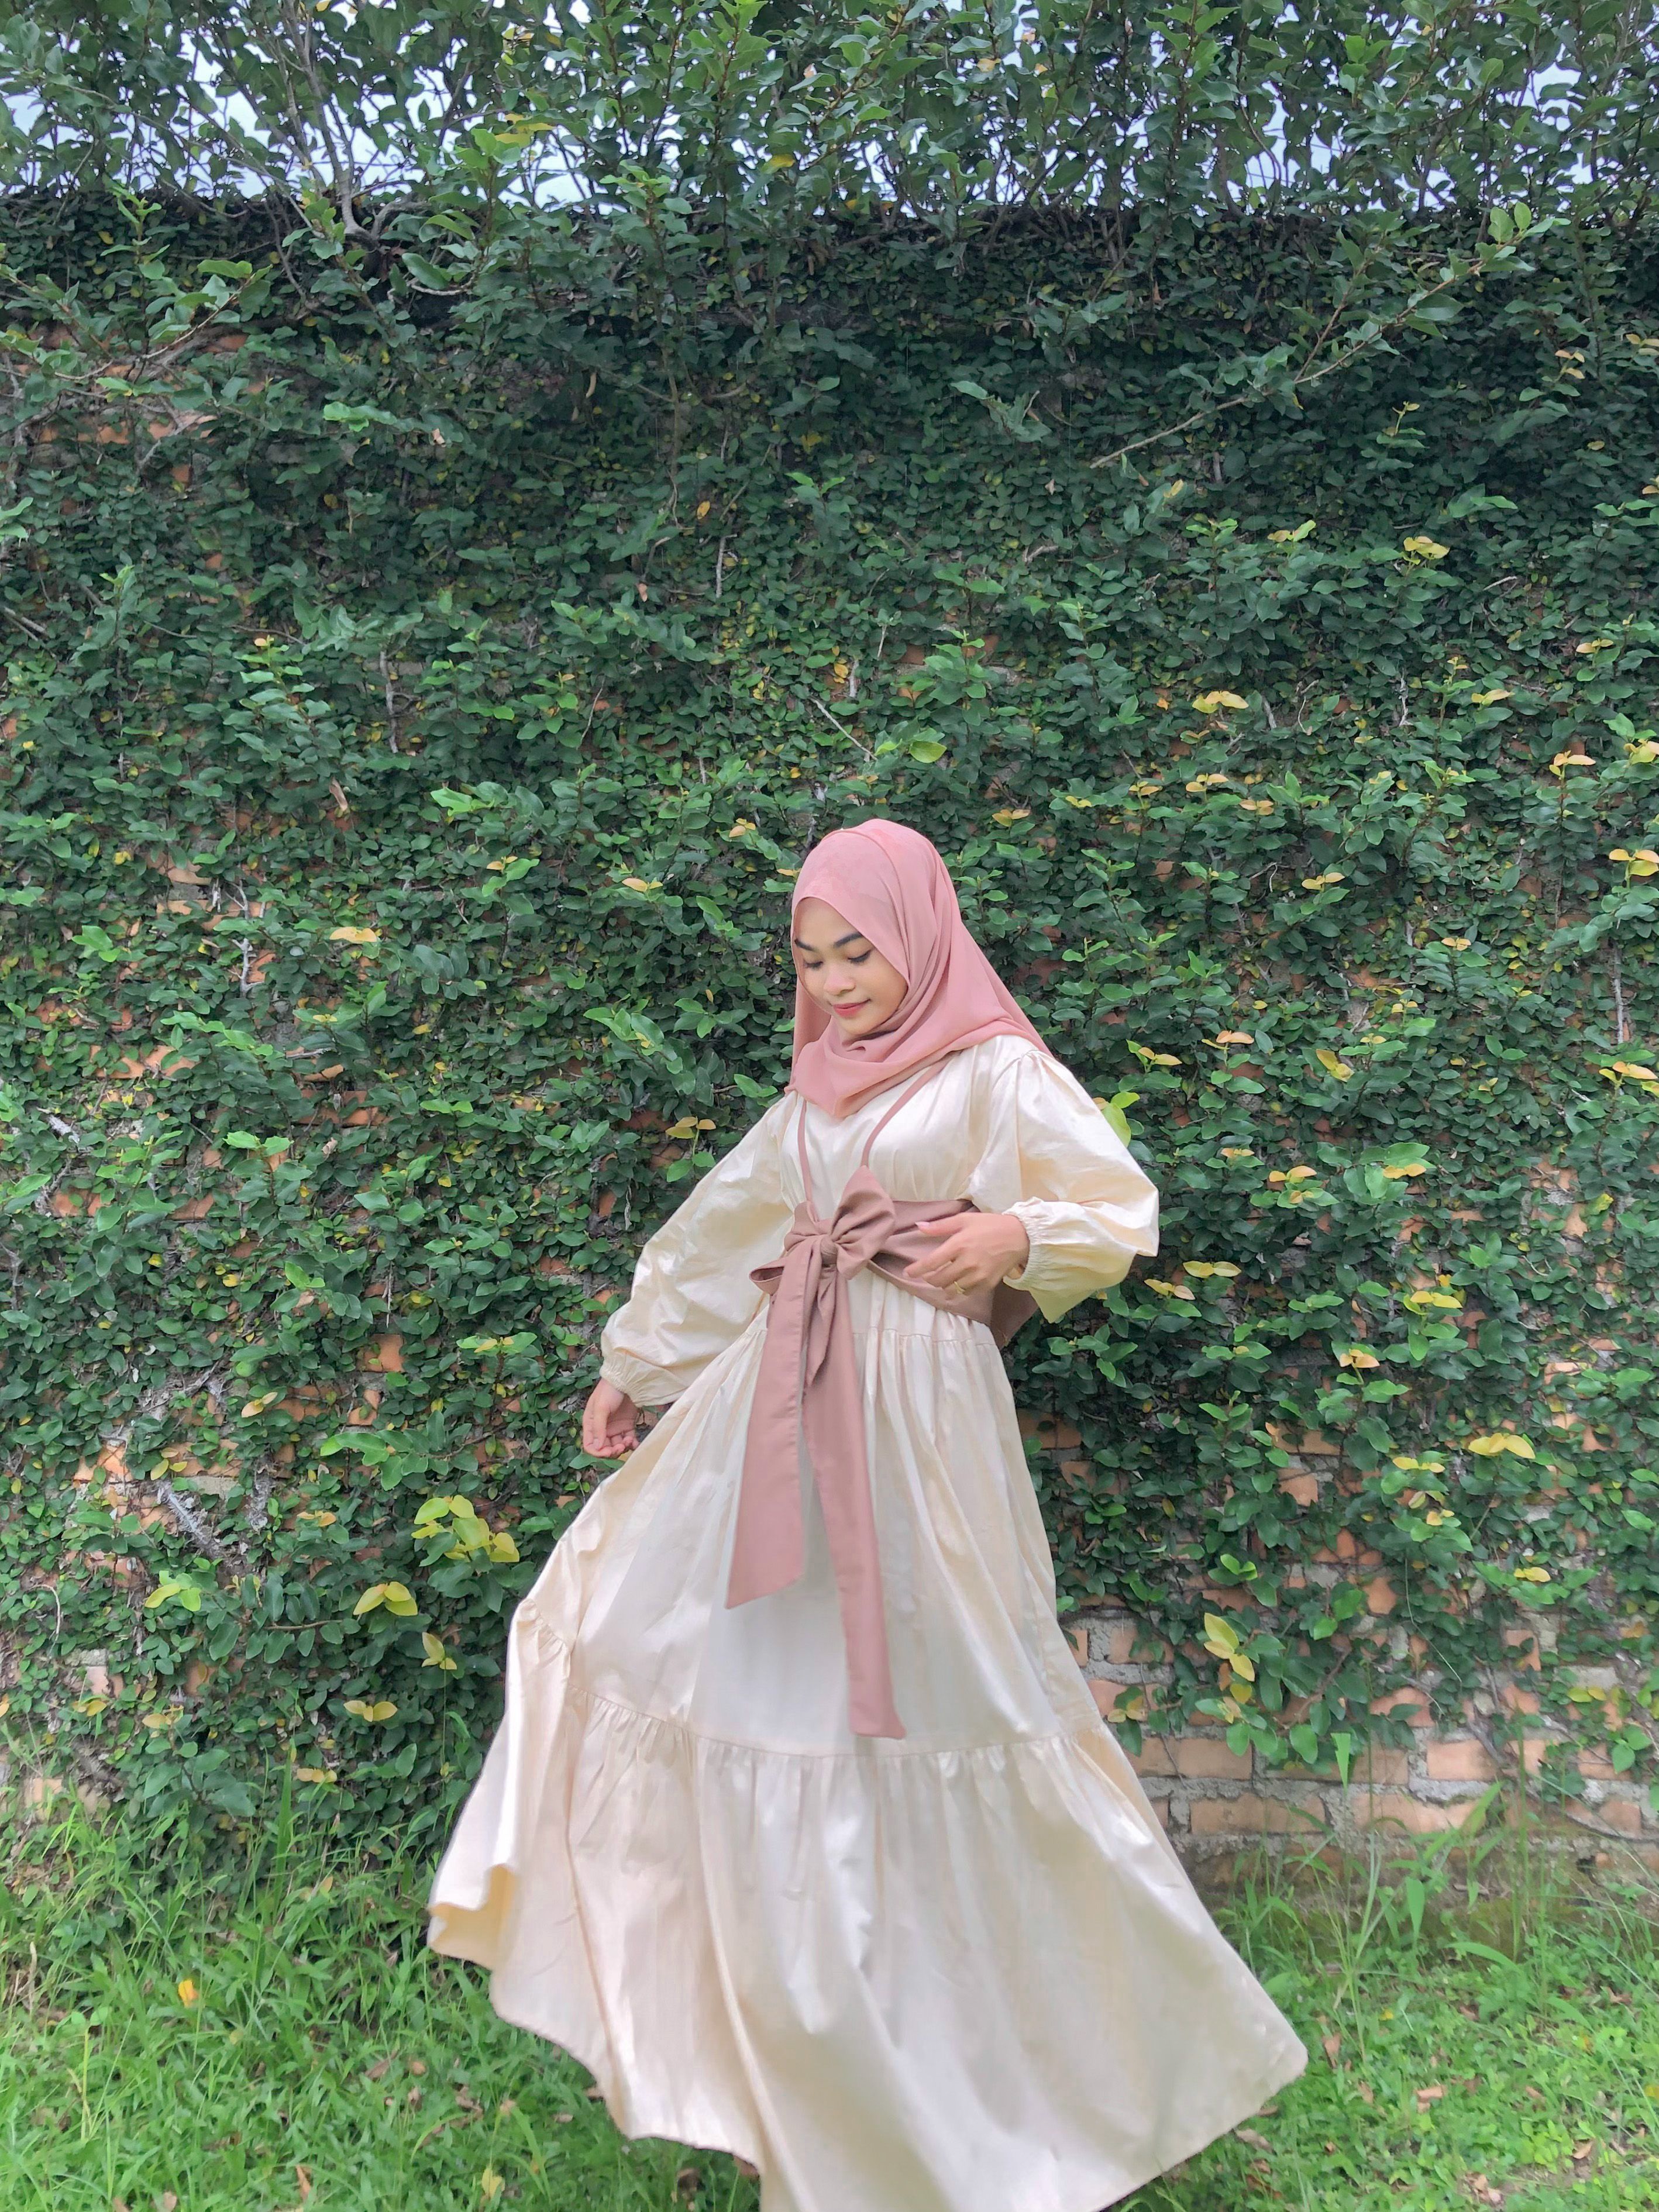 9 hijab colors that go well with cream clothes so they don't turn white